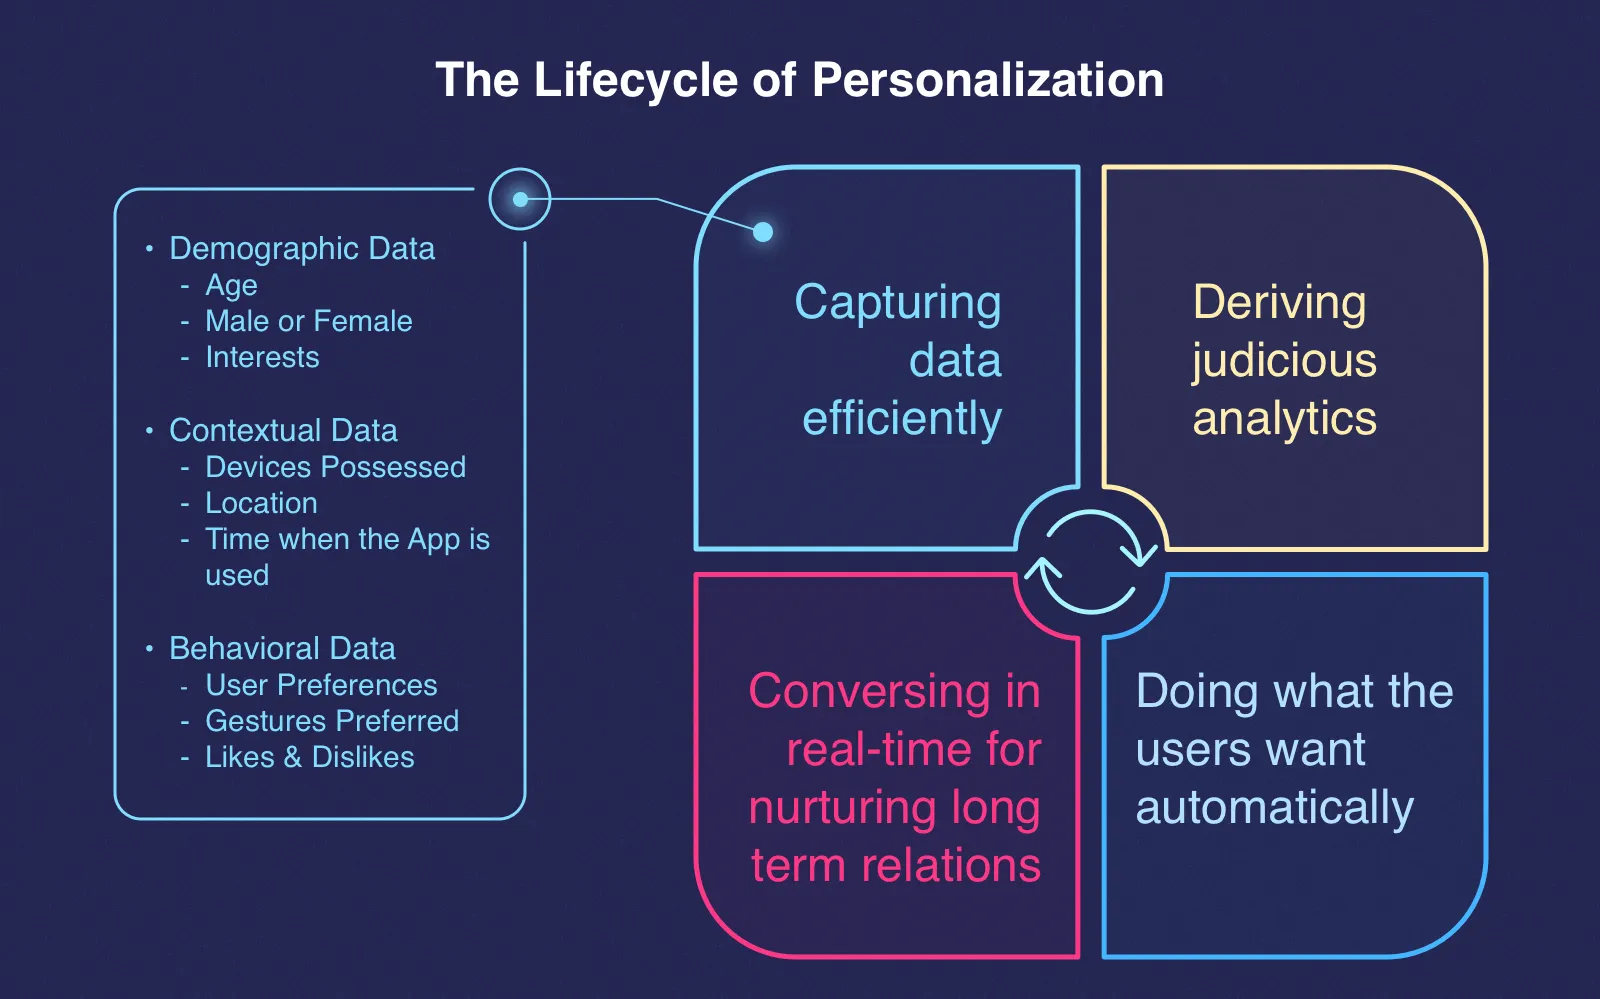 The main stages of personalization in mobile applications